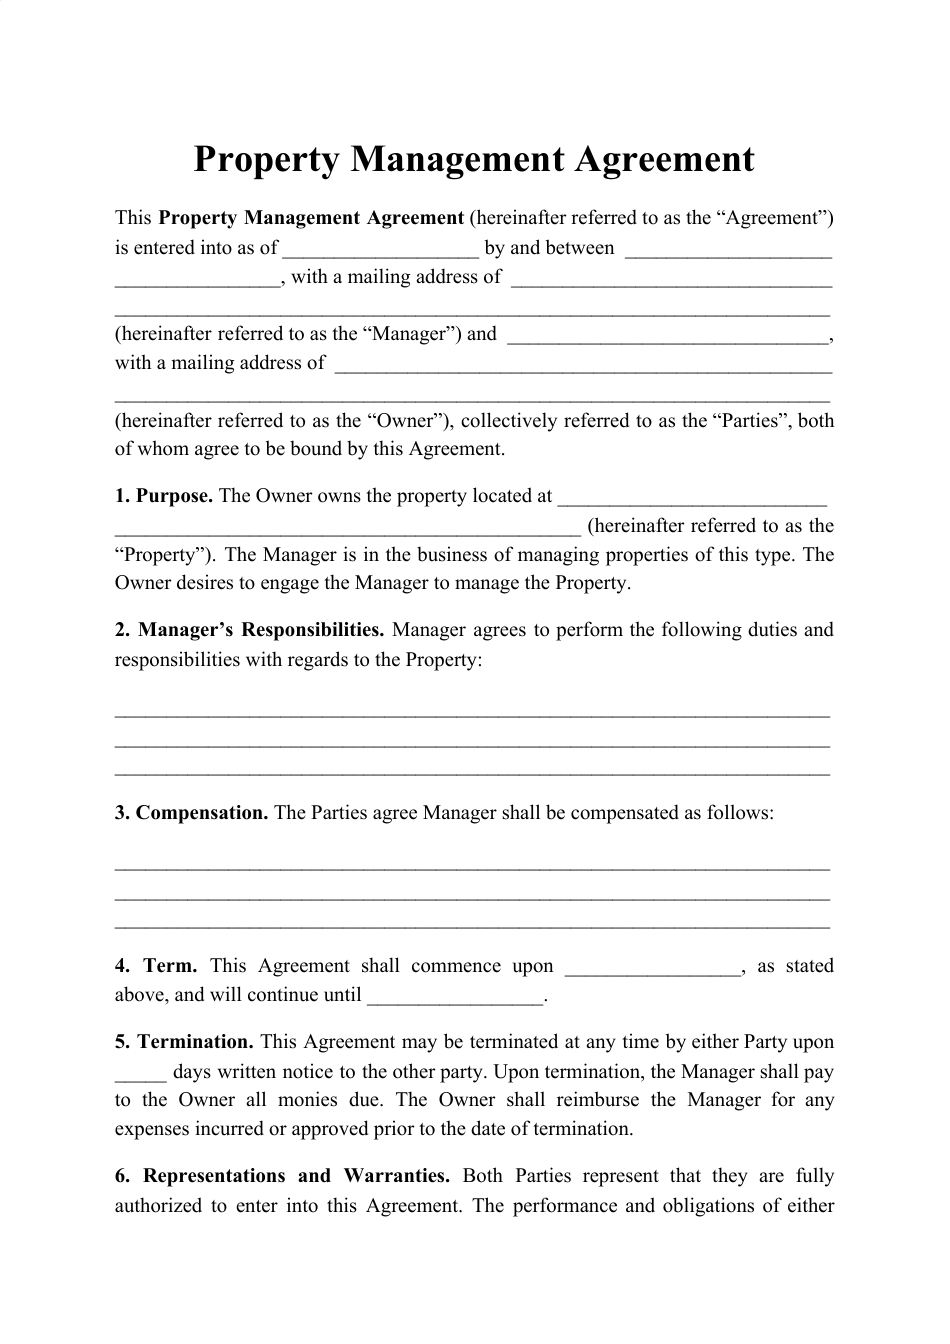 Property Management Agreement Template, Page 1